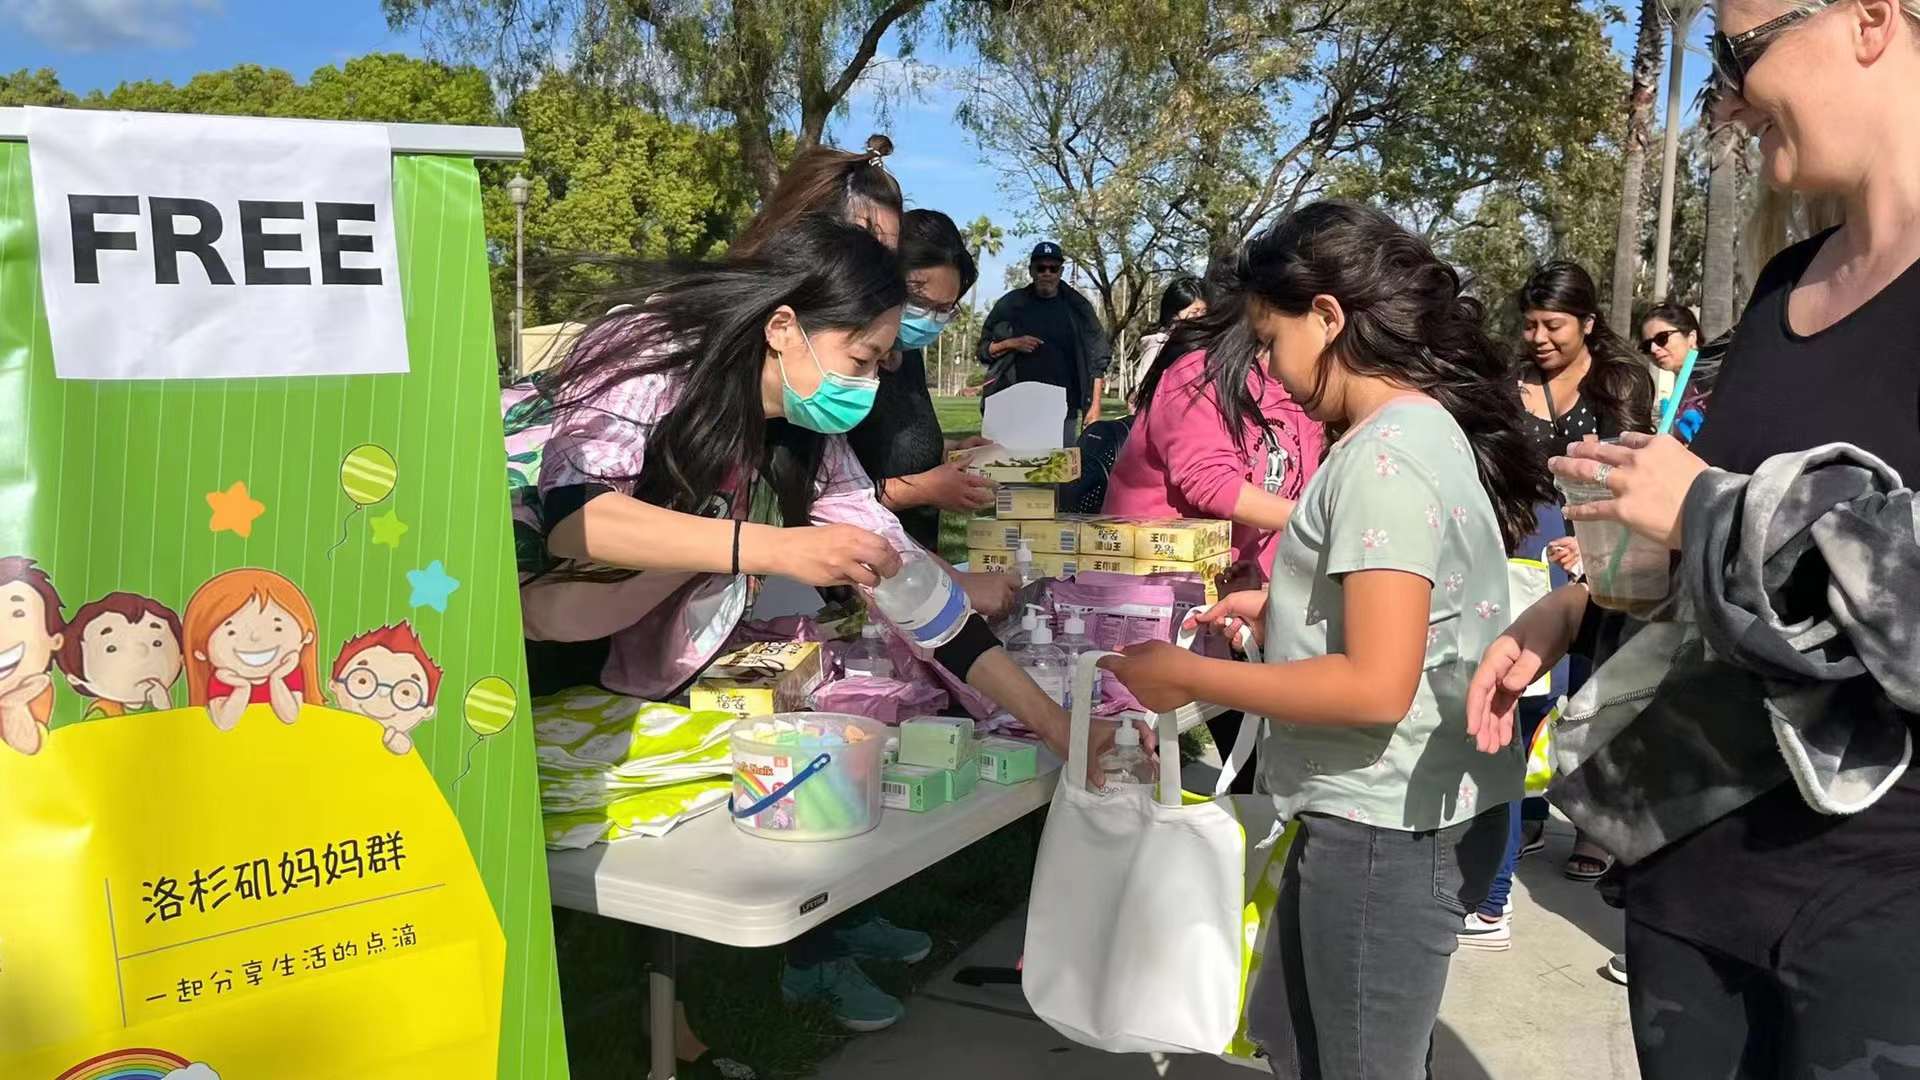 Alhambra Charity Drive – Free Health Supplies, Toys, and Bags